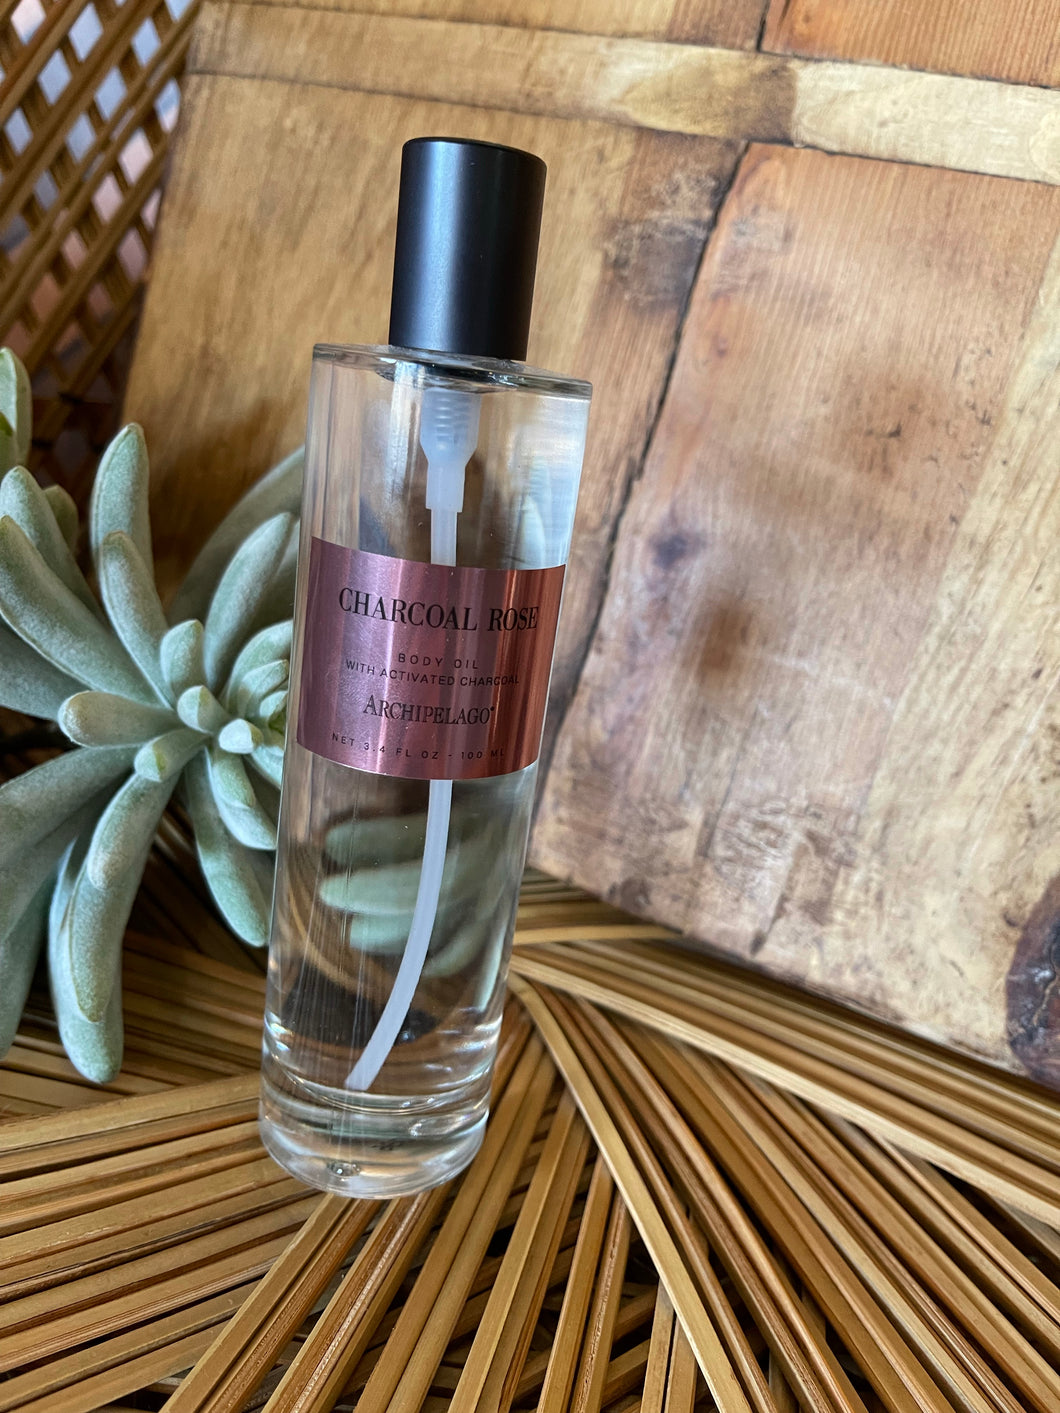 Charcoal rose body oil